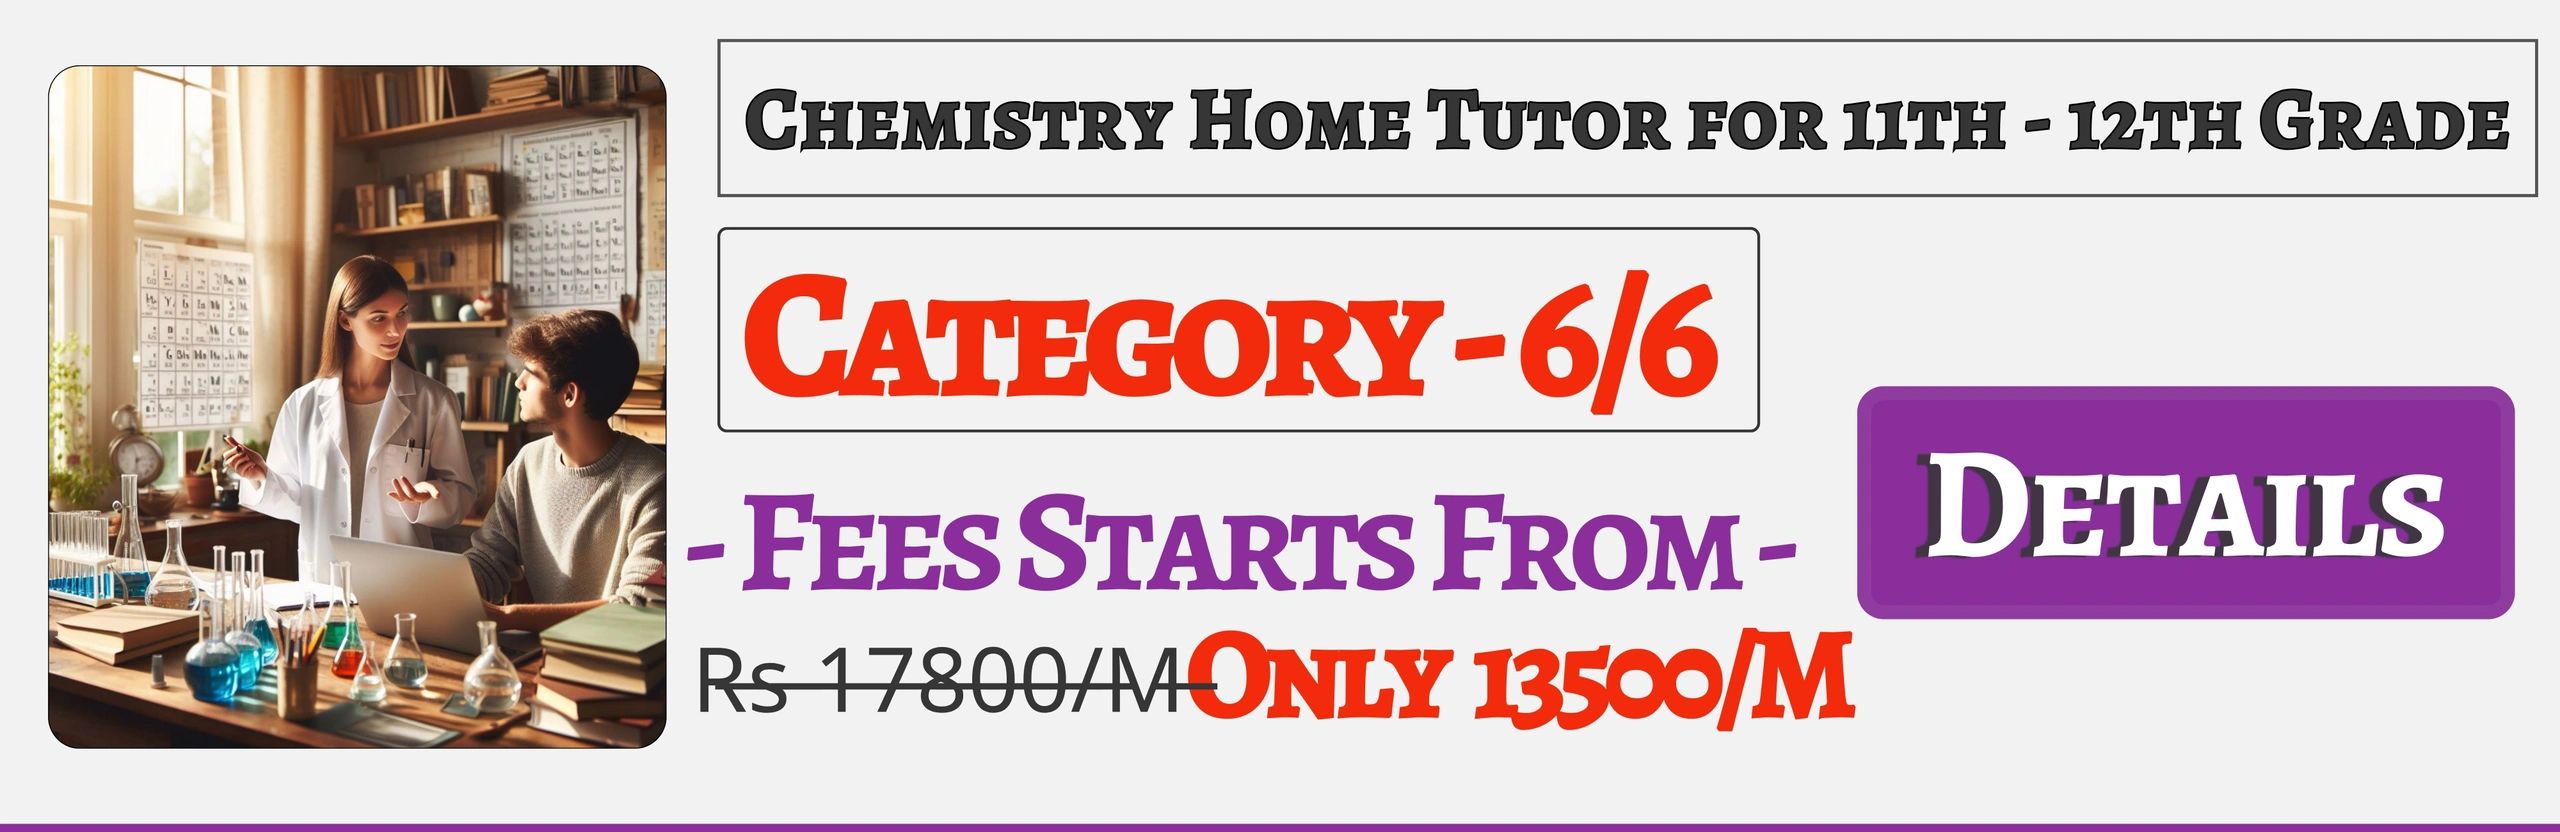 Book Best Nearby Chemistry Home Tuition Tutors For 11th & 12th In Jaipur , Fees Only 13500/M